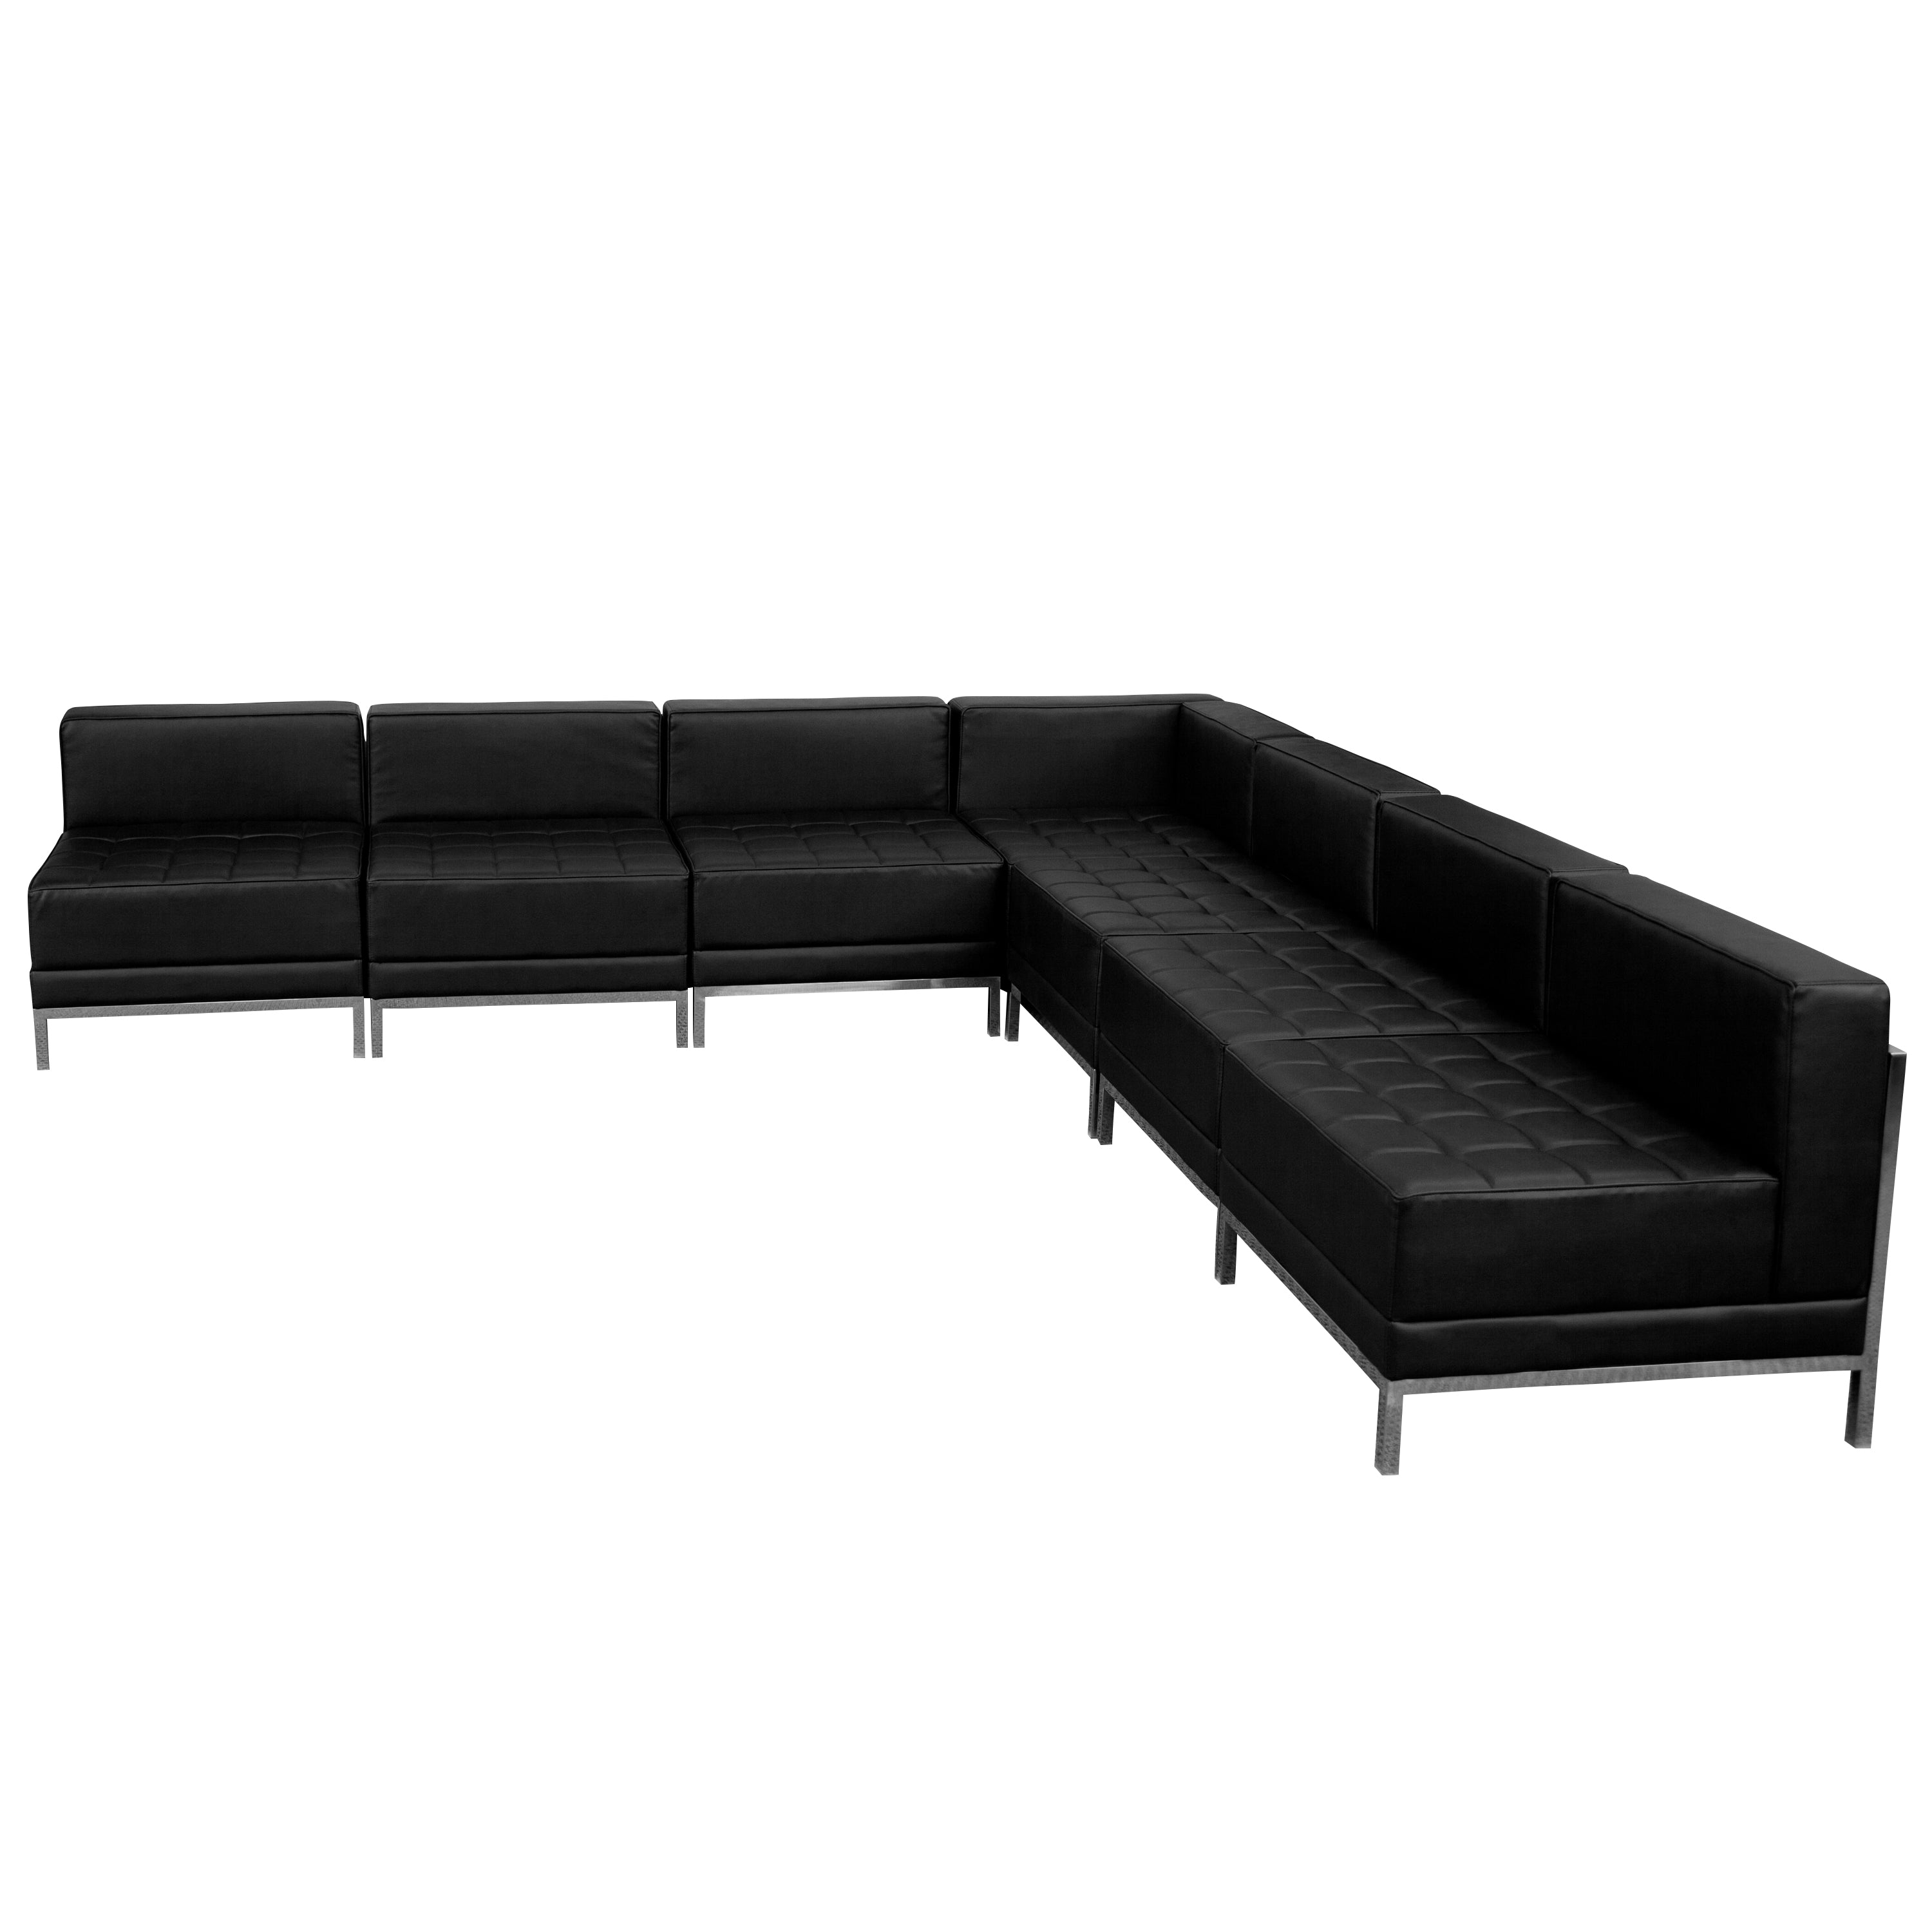 HERCULES Imagination Series LeatherSoft Sectional Configuration, 7 Pieces-Modular Reception Set-Flash Furniture-Wall2Wall Furnishings